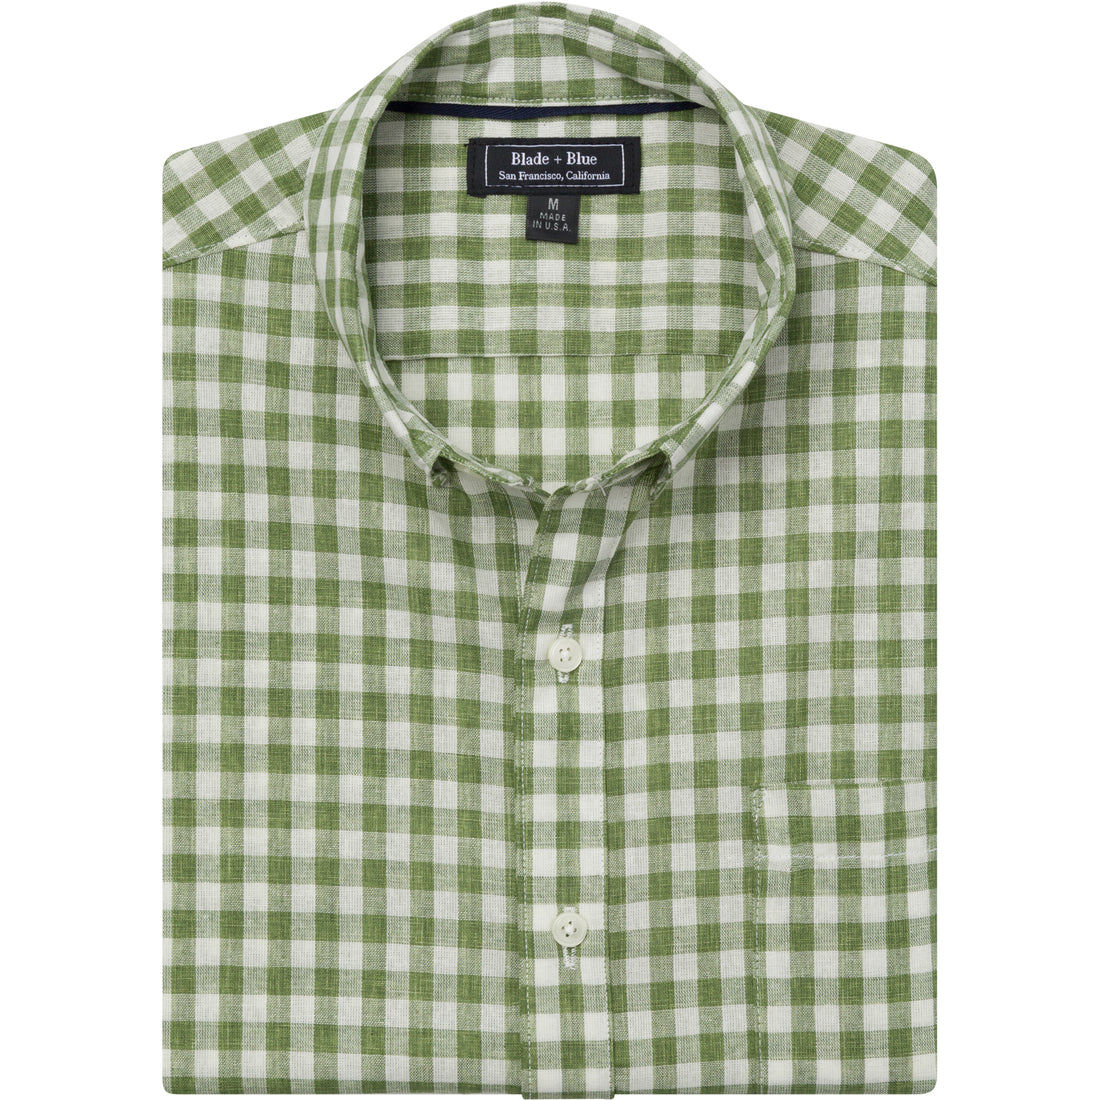 McNEIL Short Sleeve Shirt in Sage Green &amp; White Gingham Check